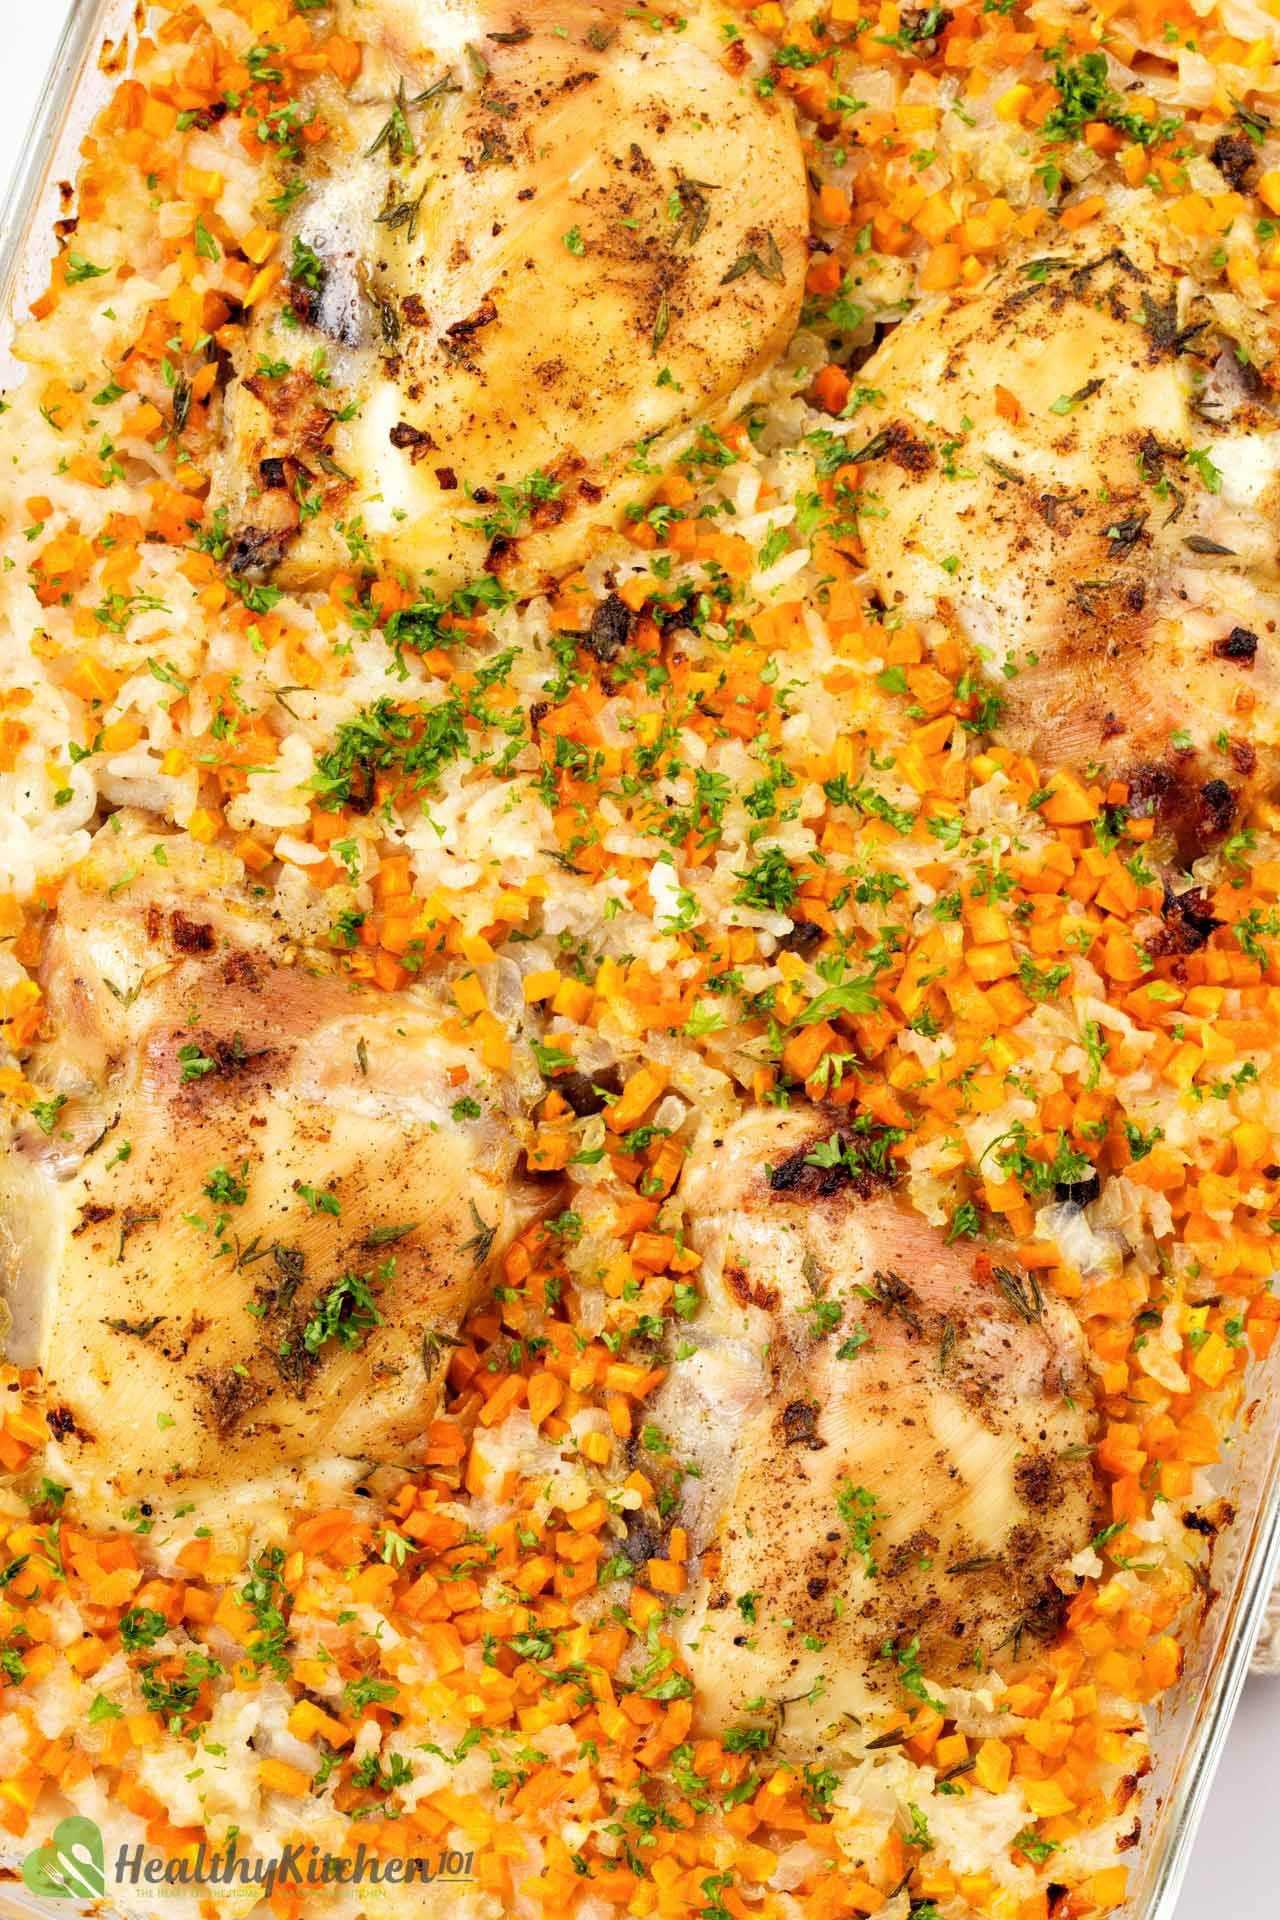 Homemade healthy Chicken and Rice Casserole